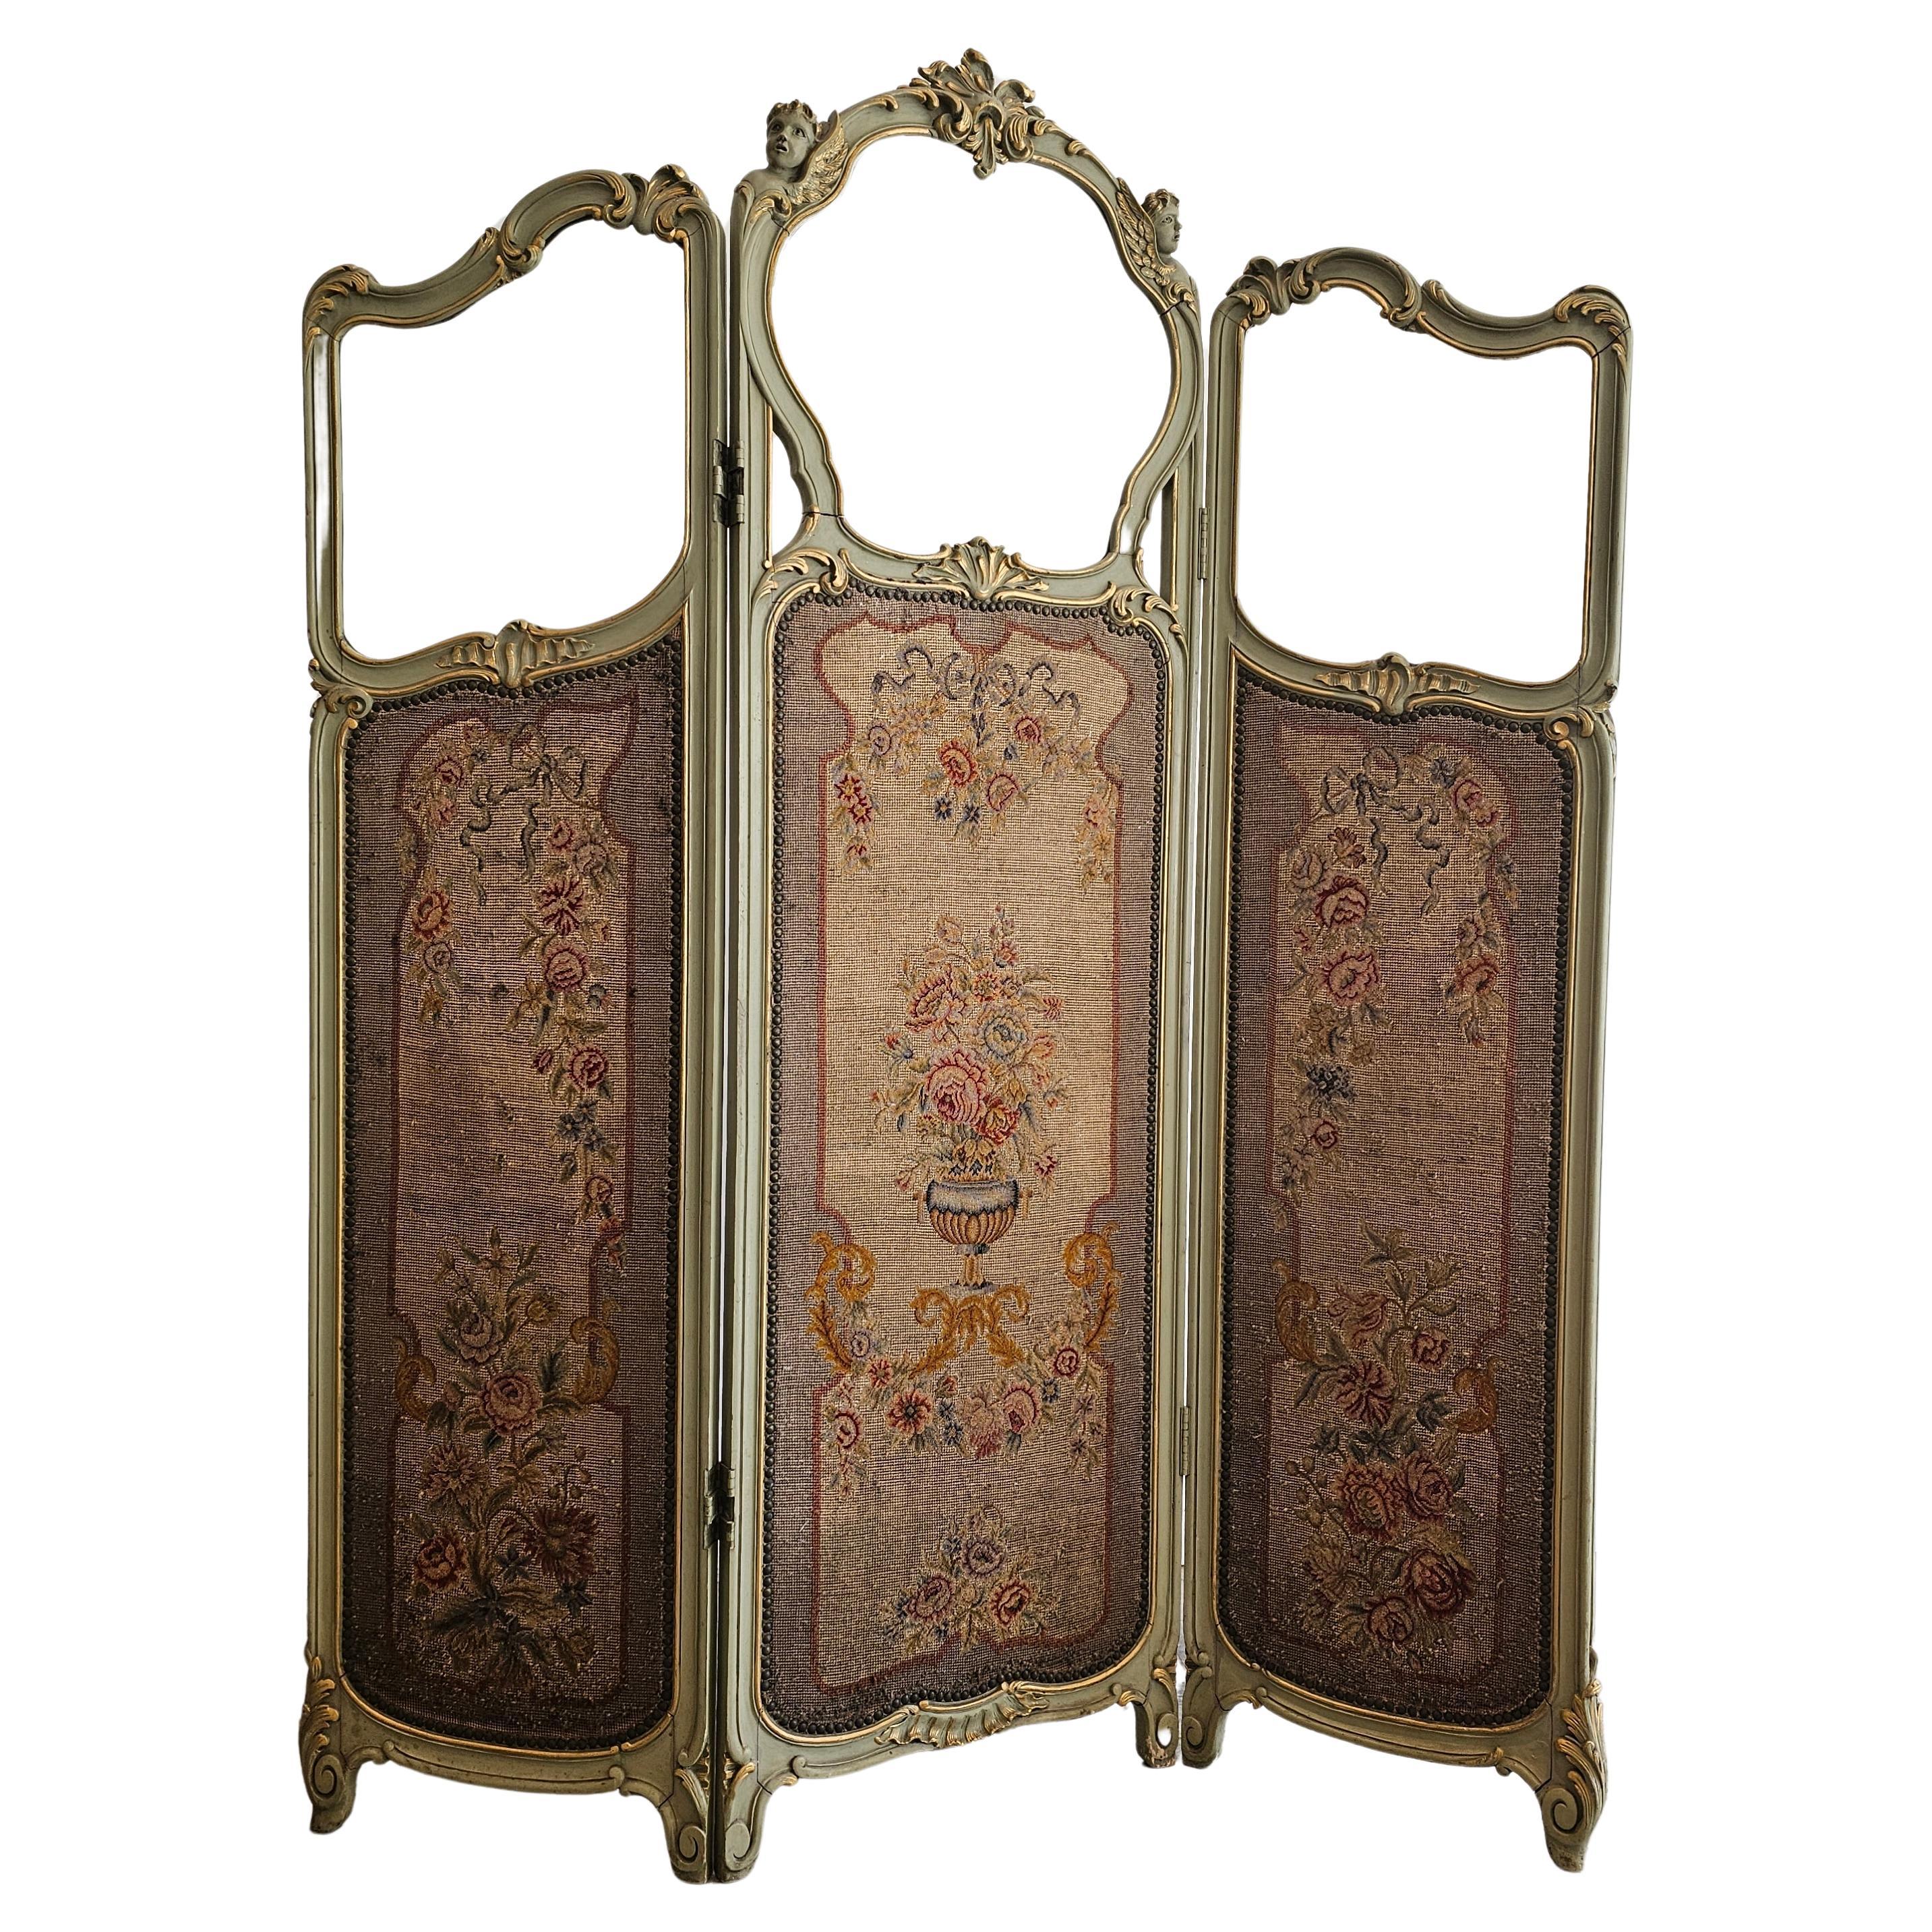 French Luxury Folding 3 Panel Screen, room divider